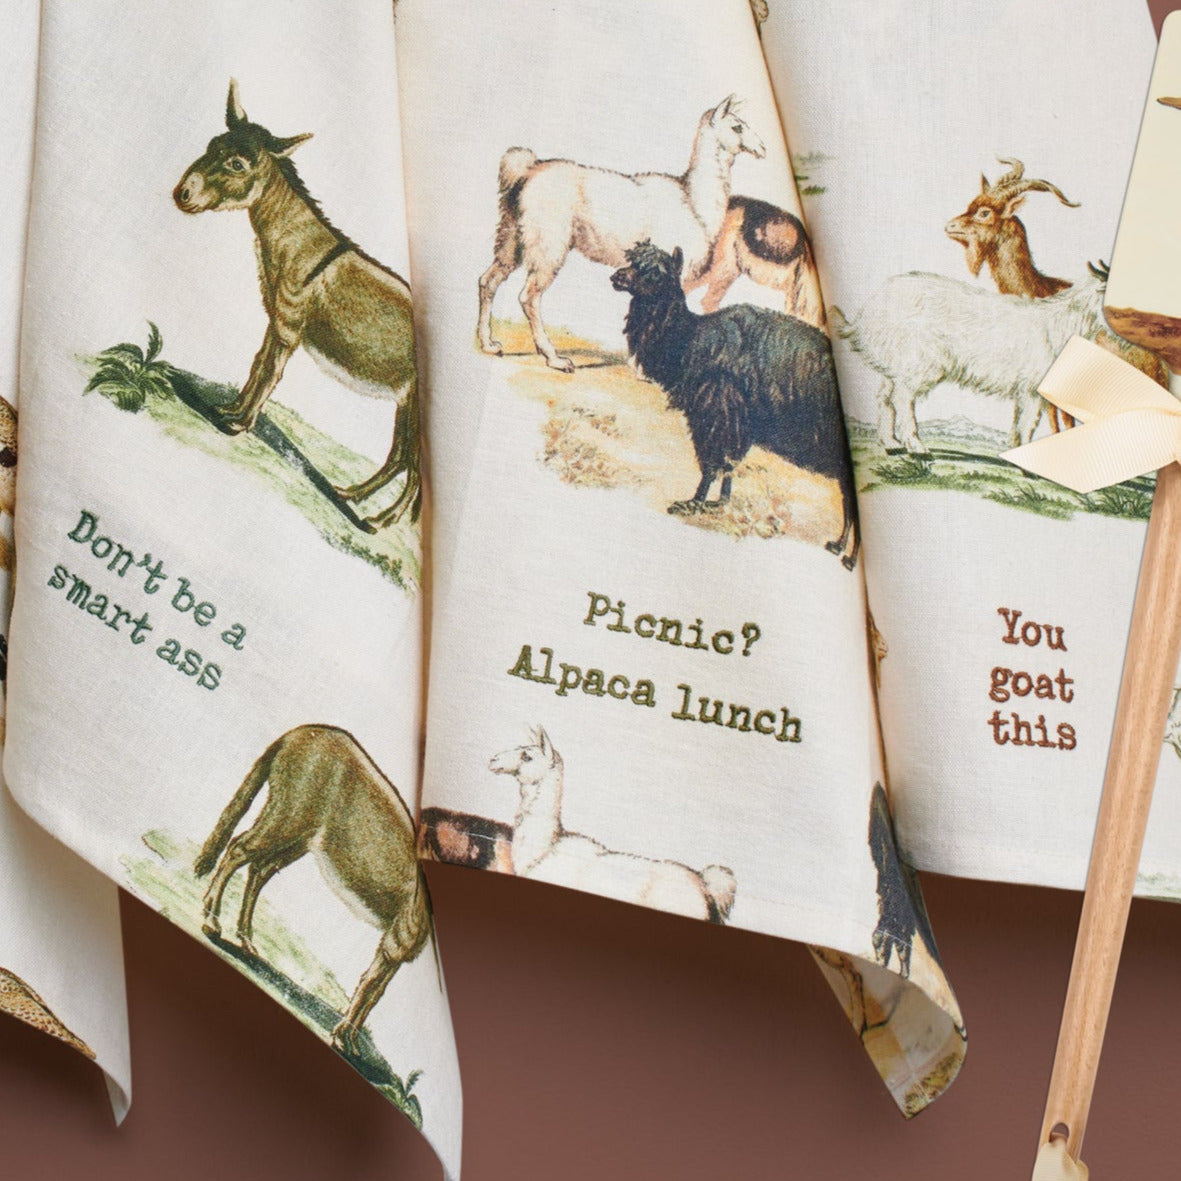 Picnic? Alpaca Our Lunch Dish Cloth Towel | Cotten Linen Novelty Tea Towel | Embroidered Text | 18" x 28"